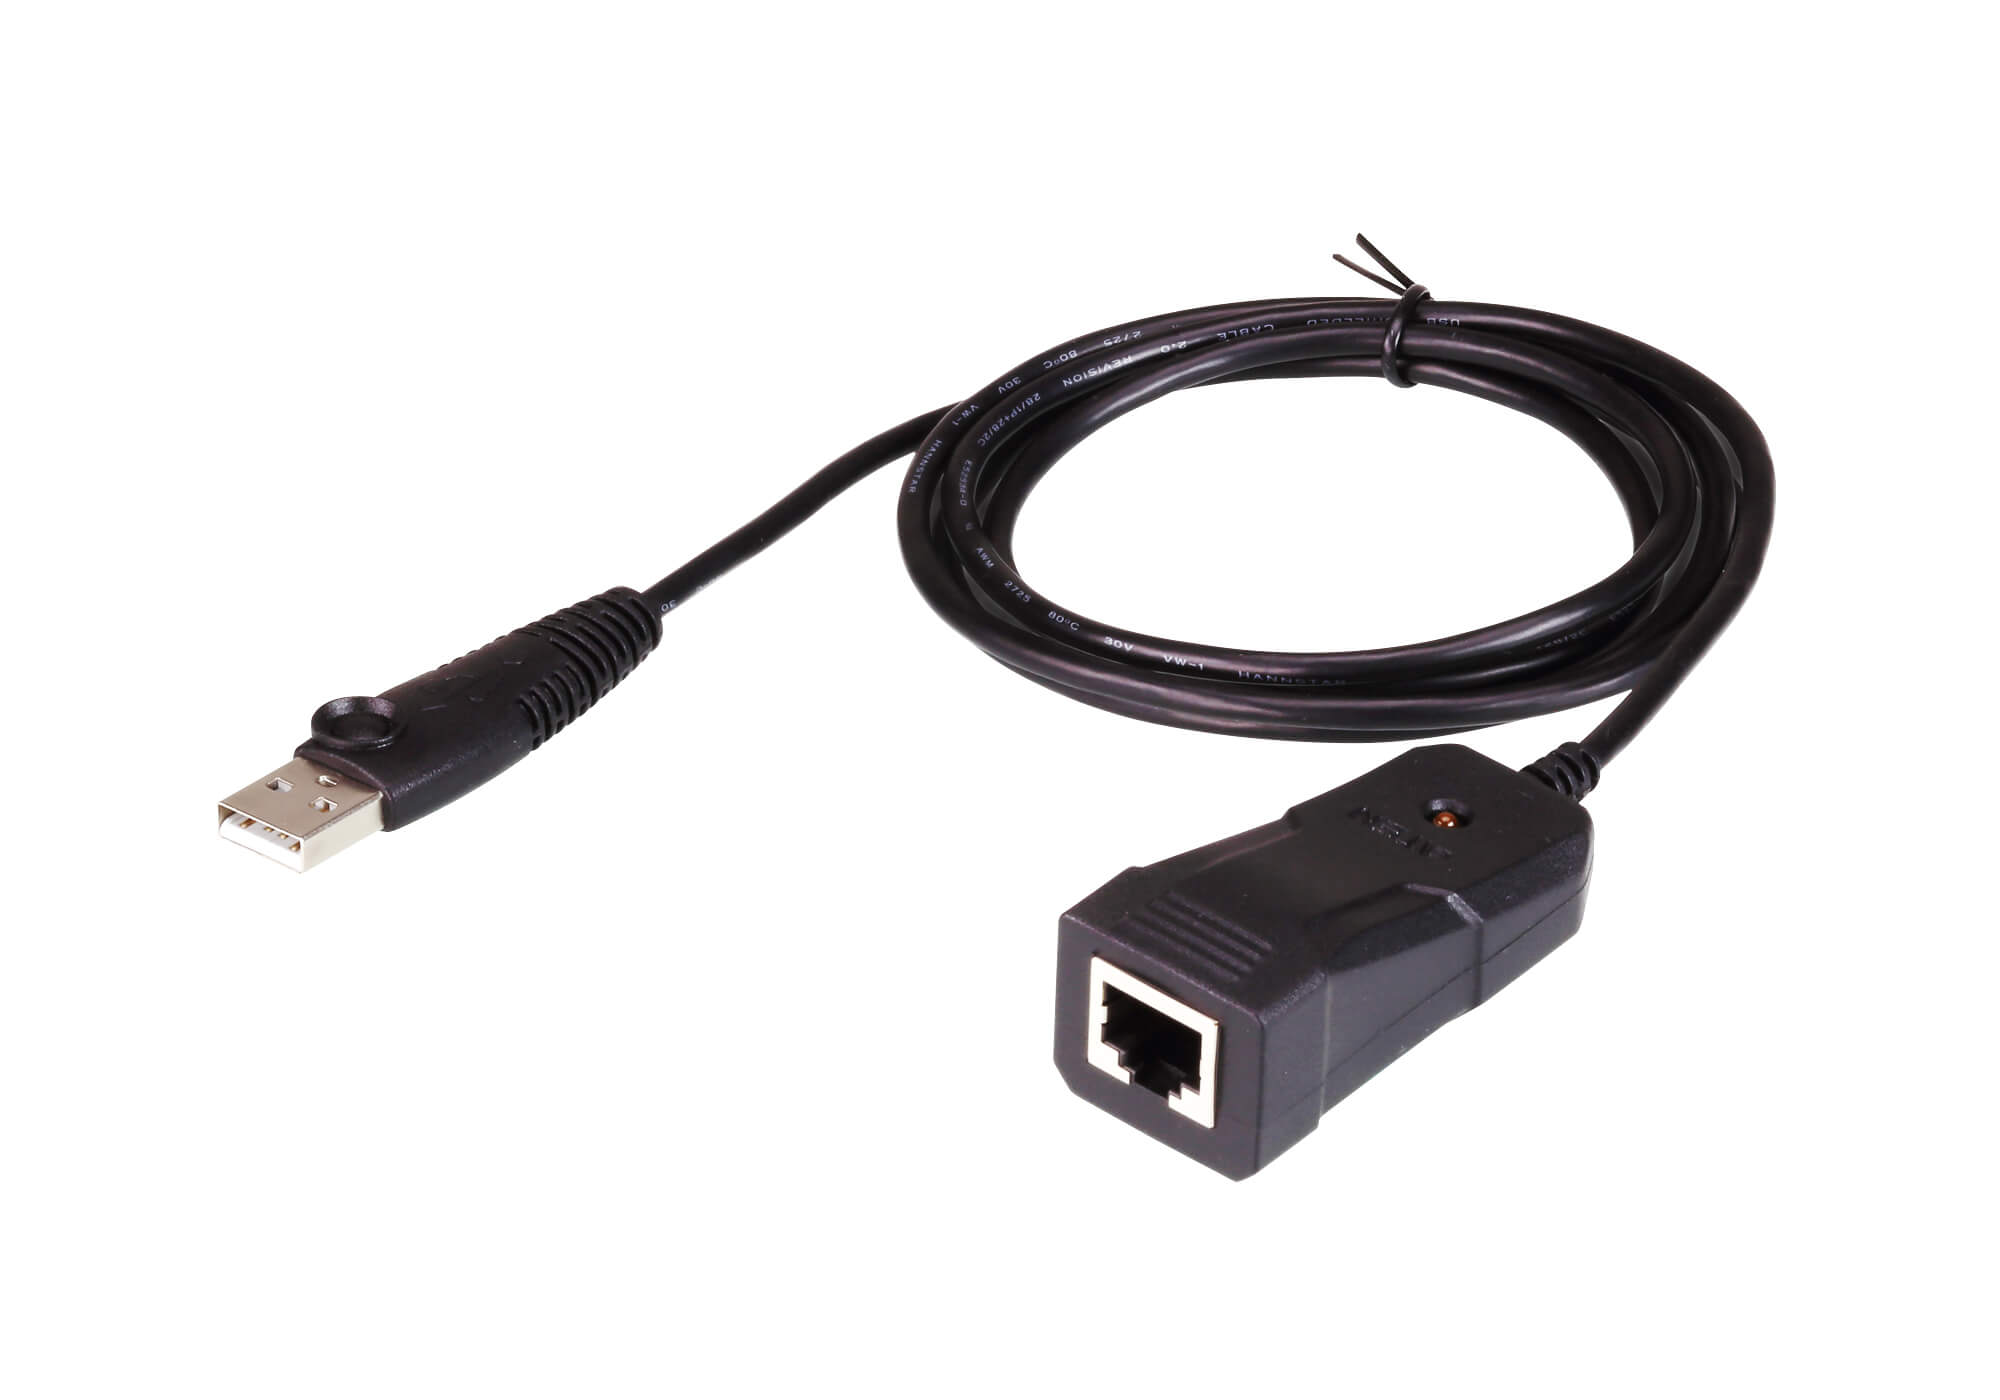 ATEN USB to RJ-45 Serial (RS232) converter; Support Straight RJ45 Cable, 921.6 Kbps Data Transfer Rate; OS Compatibility: Windows, Mac, Linux